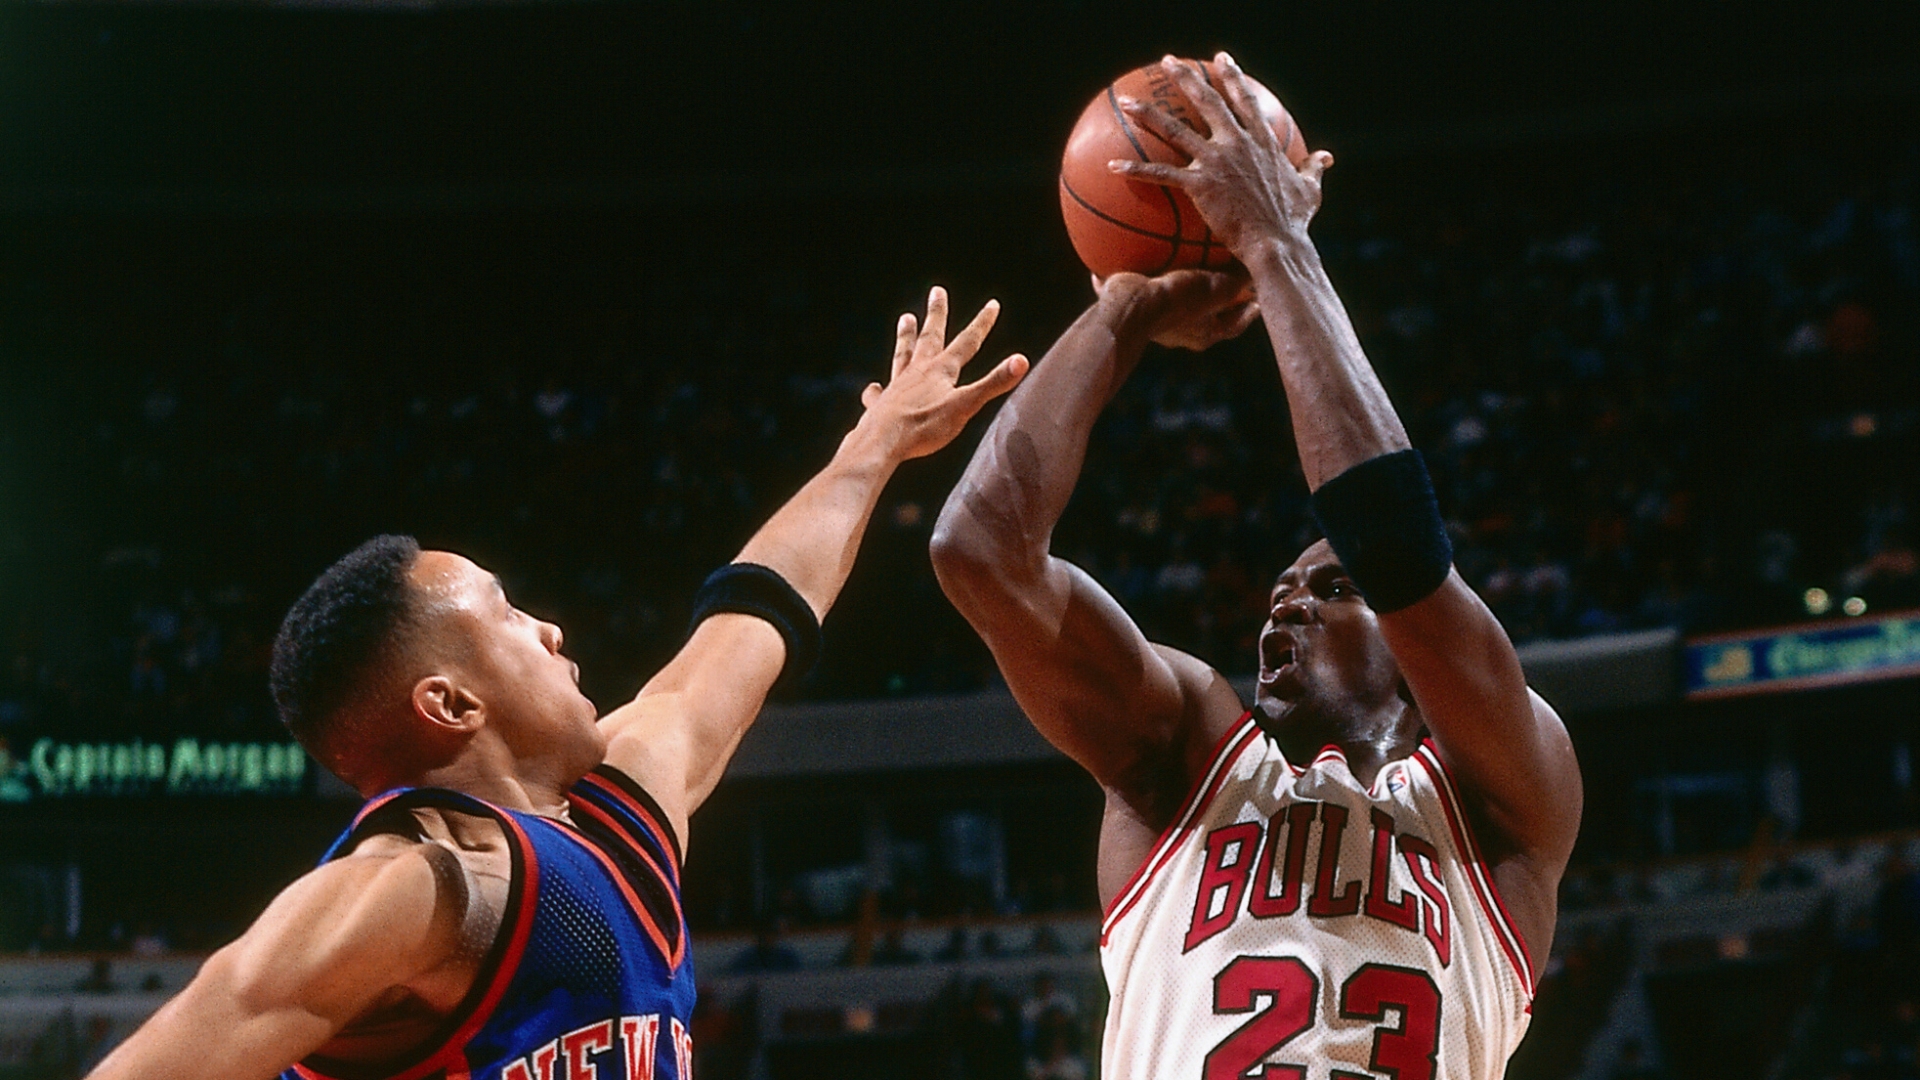 Flashback: MJ drops 44 on Knicks in Game 1 of '96 Eastern Conference semis